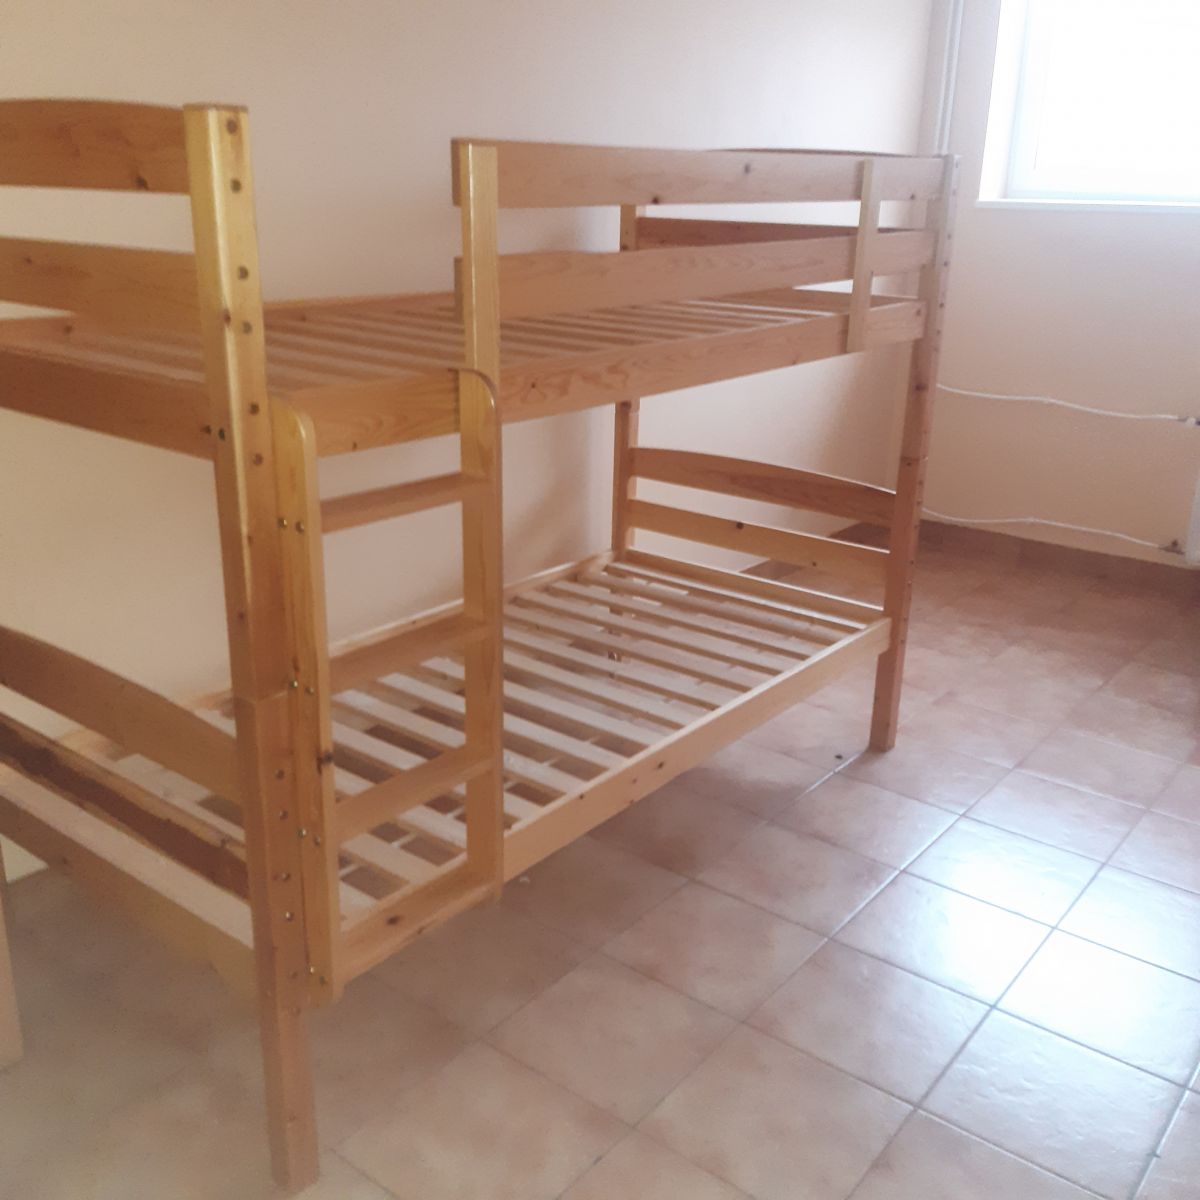 Bunk bed 90x200 cm. Sell